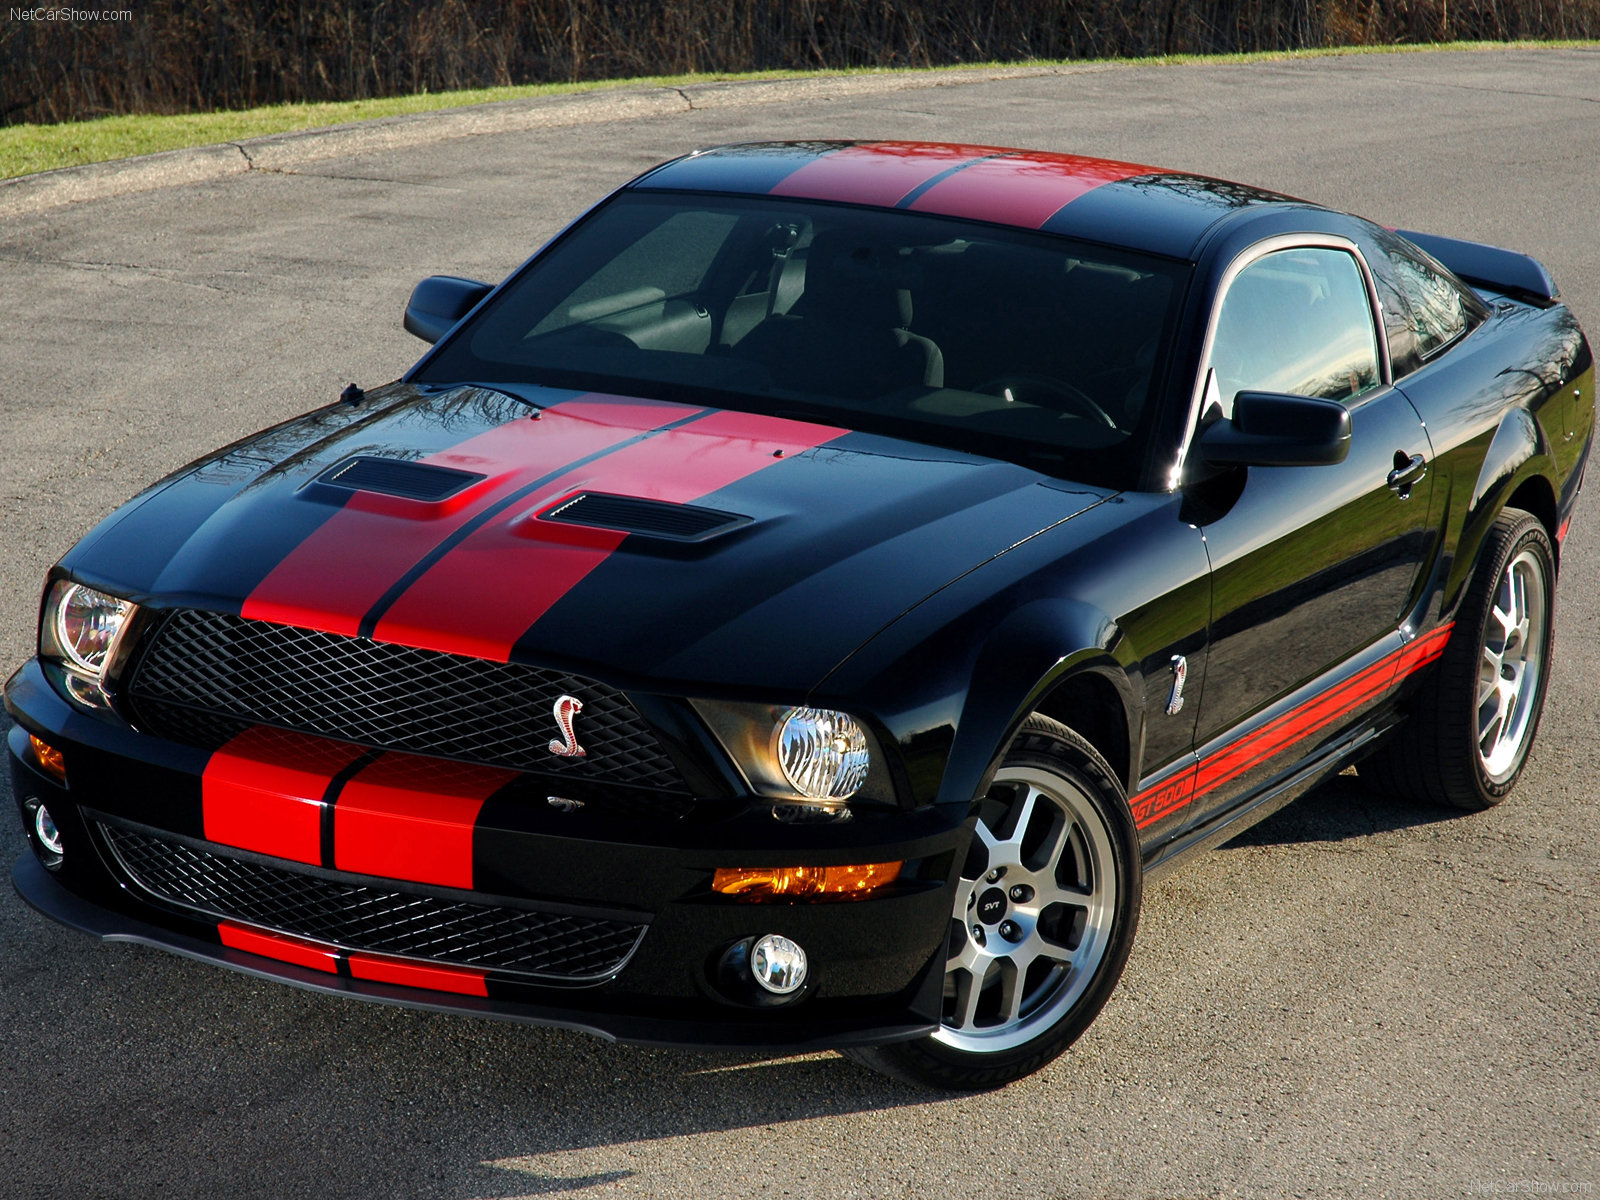 Ford Mustang Shelby Gt500 Red Stripe Photos Photogallery With 8 Pics